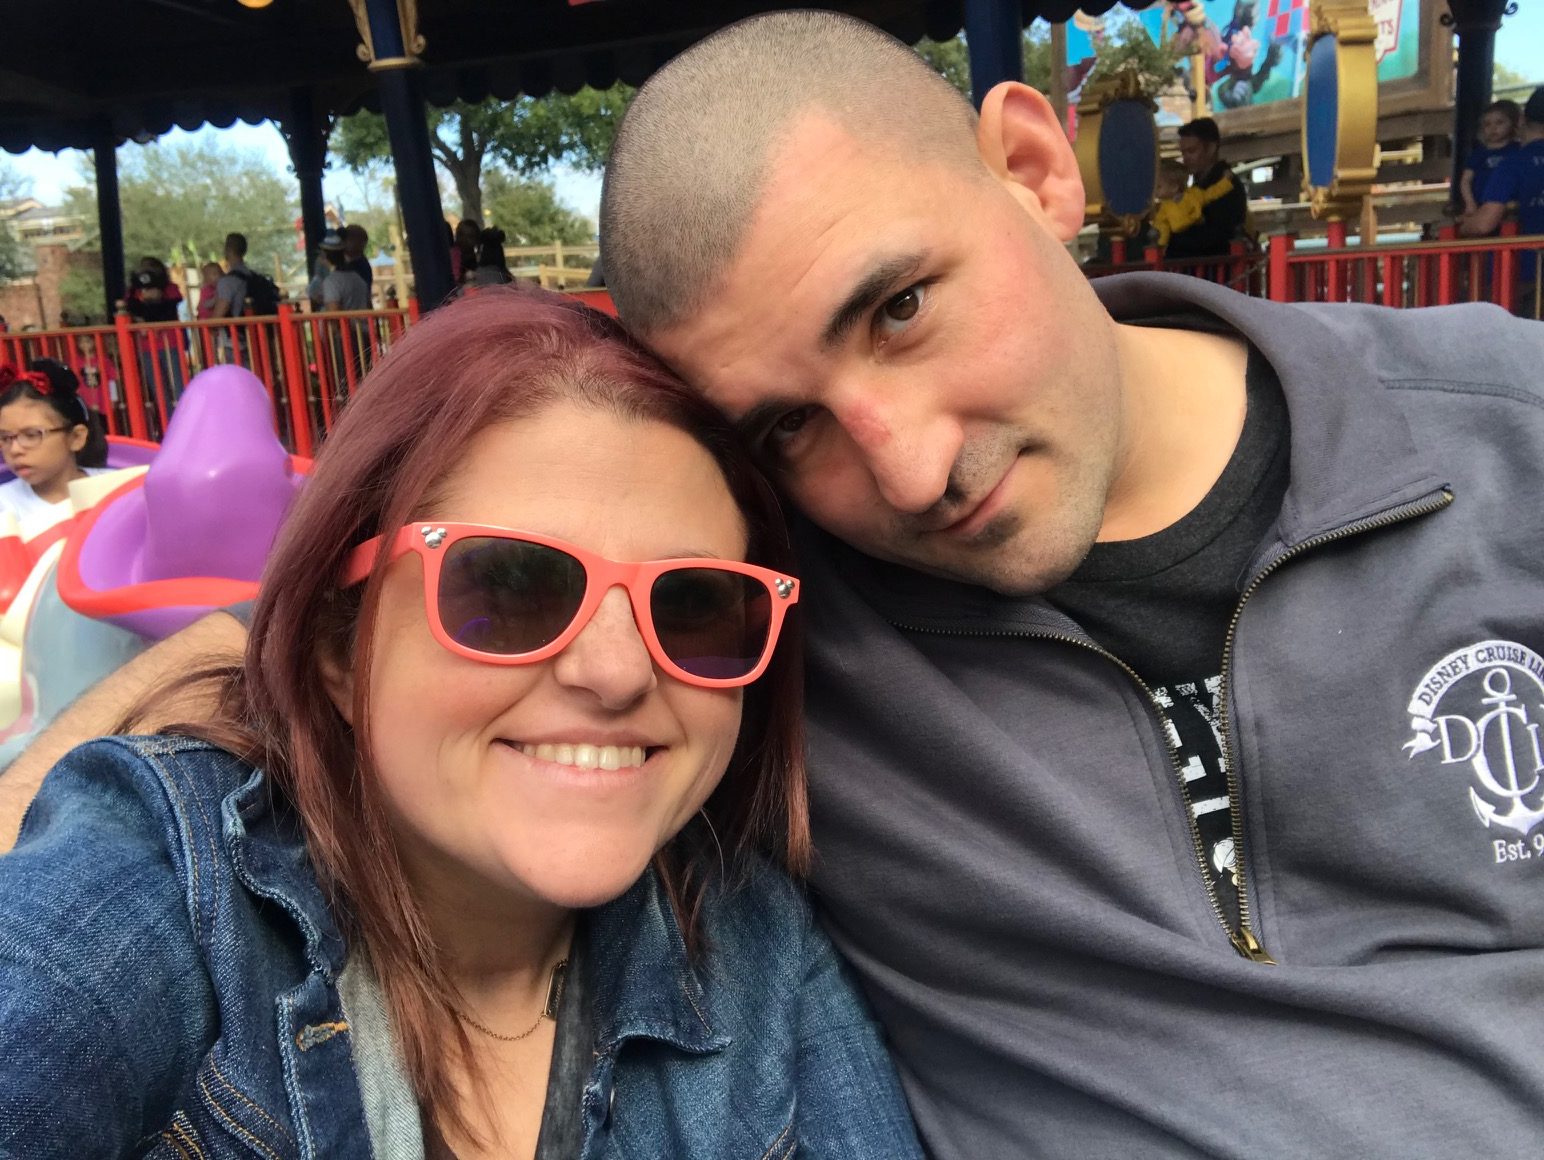 Husband and wife riding Dumbo